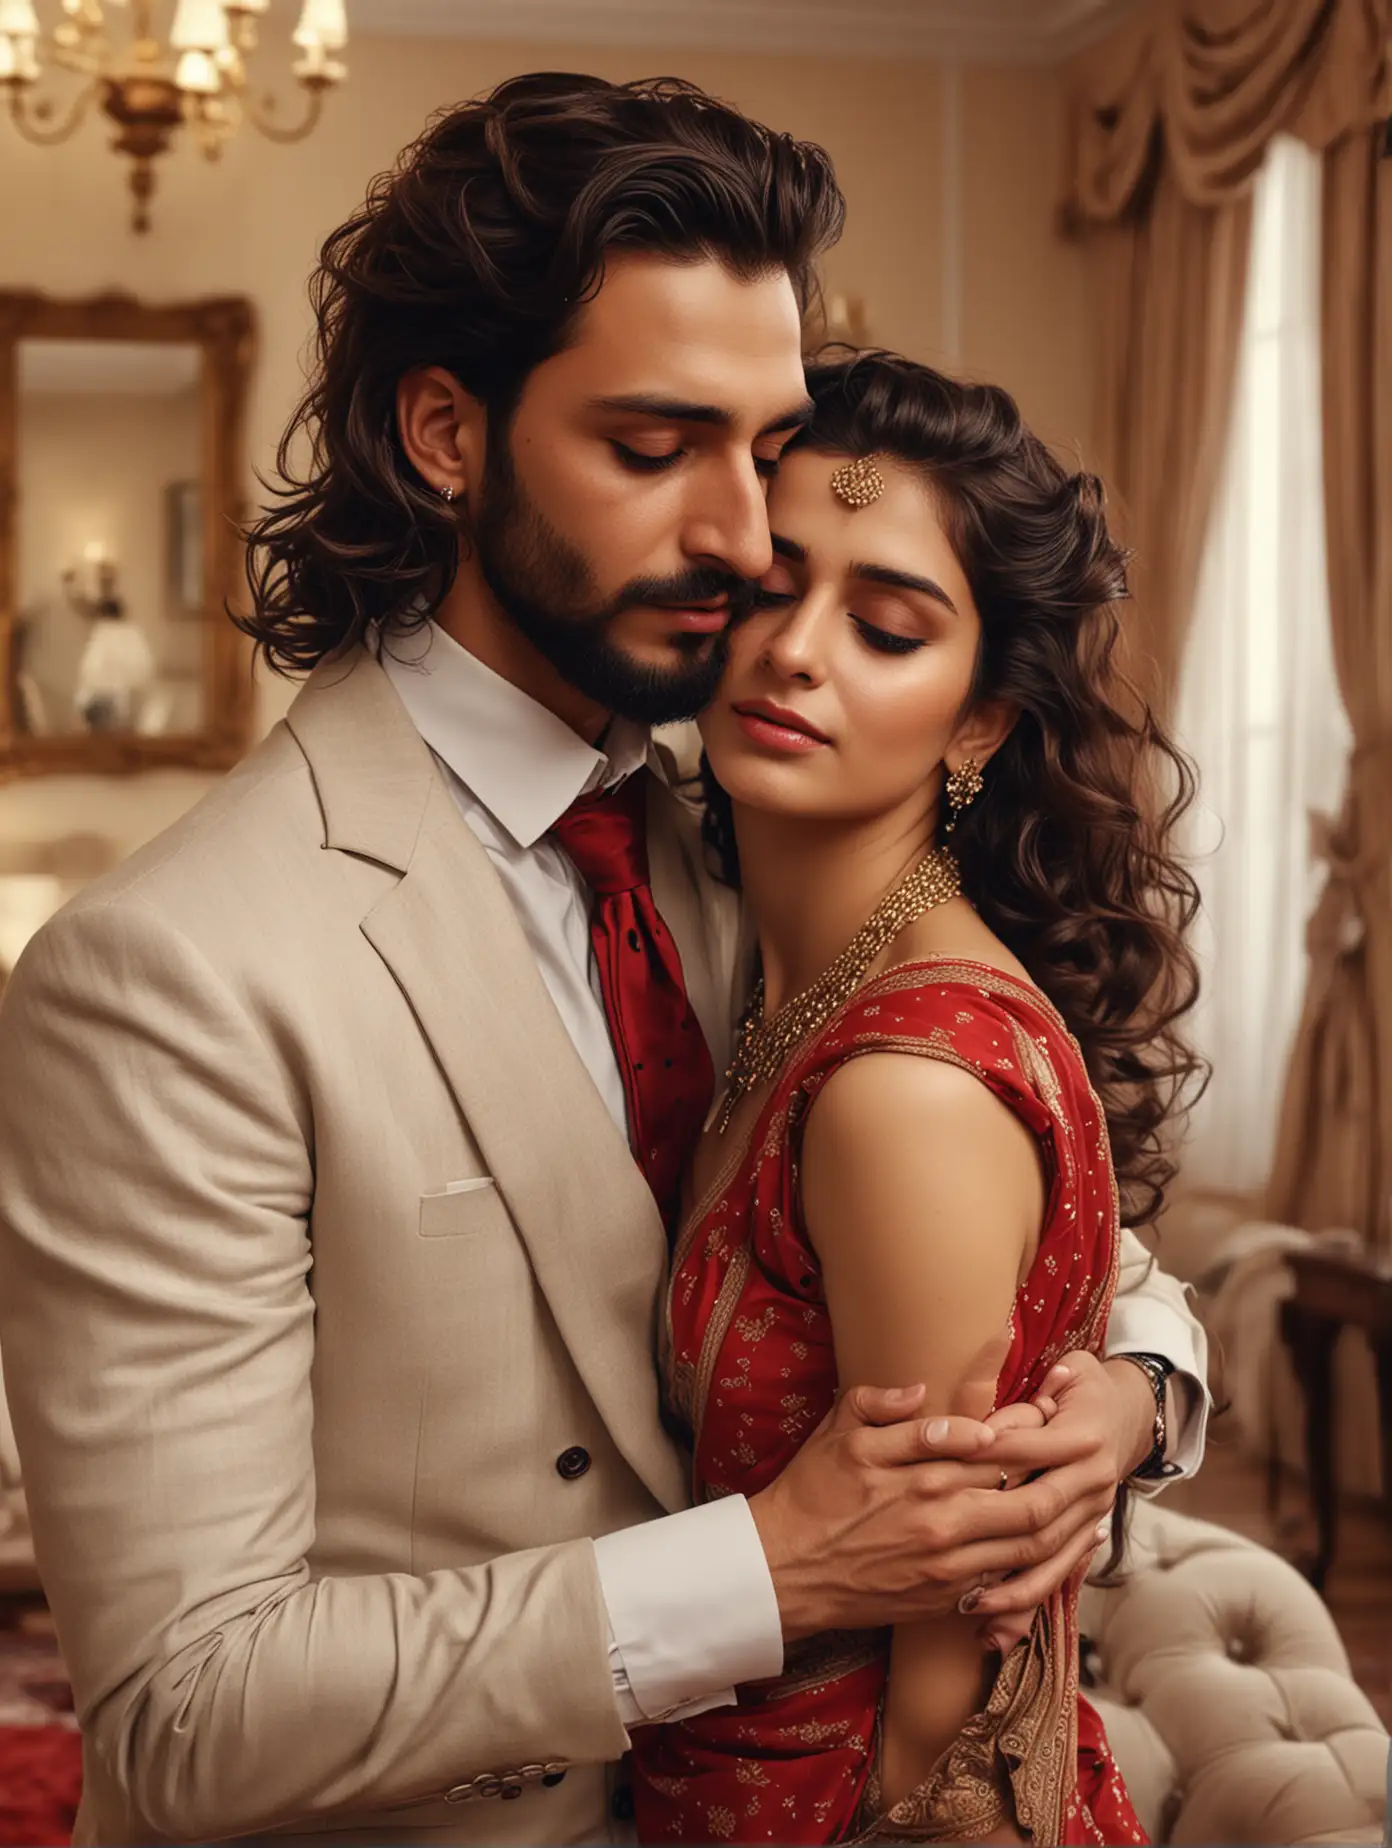 Emotional-Reunion-of-Elegant-European-and-Indian-Couple-in-Romantic-Modern-Interior